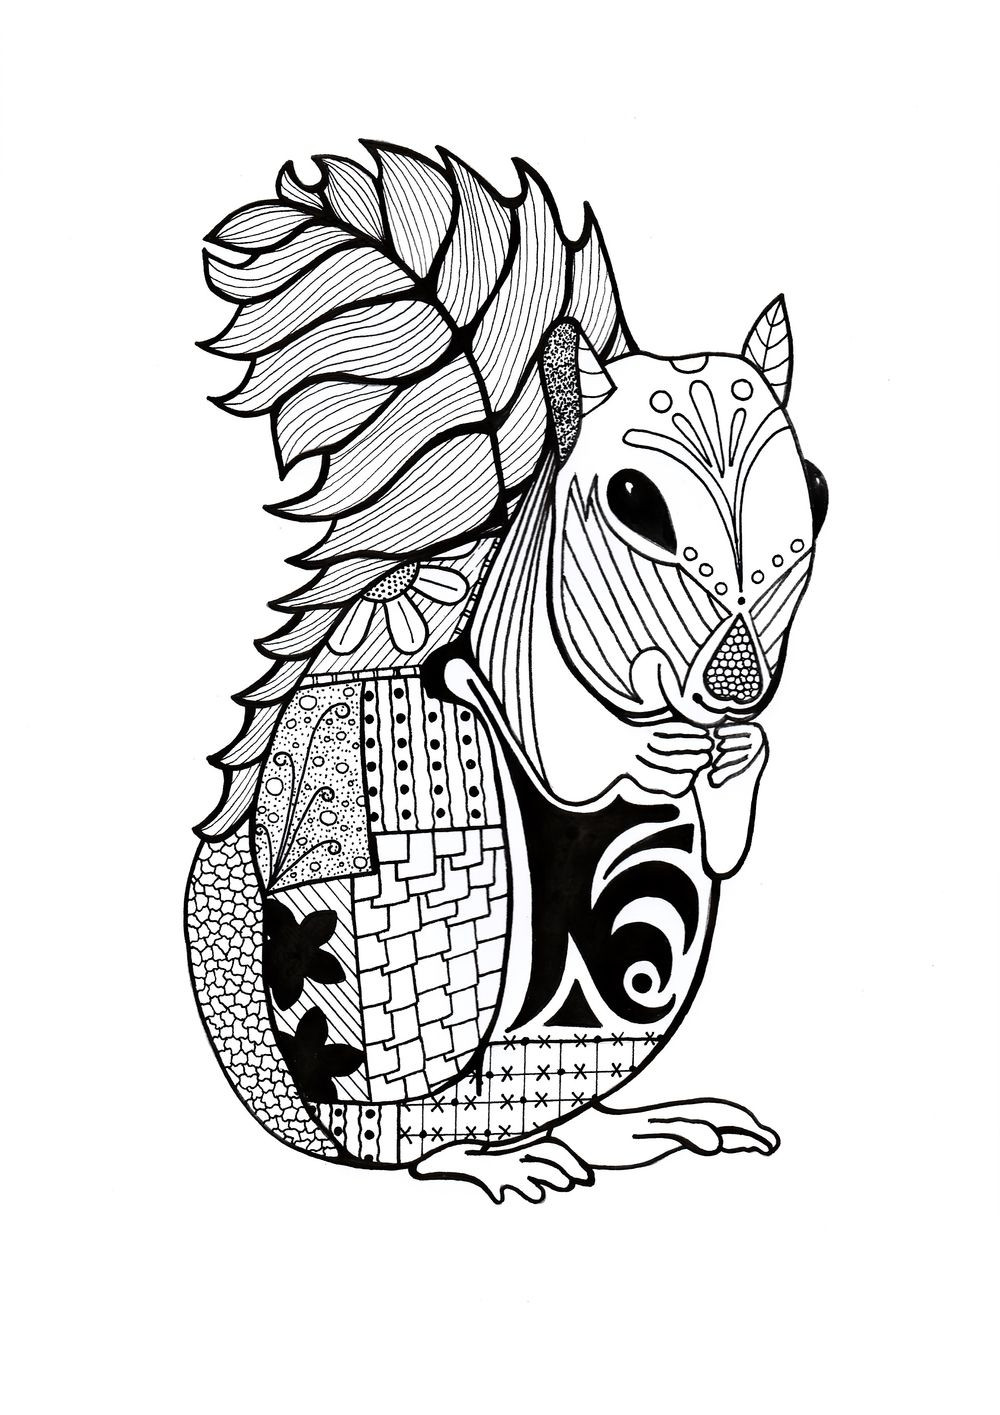 Printable Animal Coloring Pages For Adults
 Intricate Squirrel Adult Coloring Page